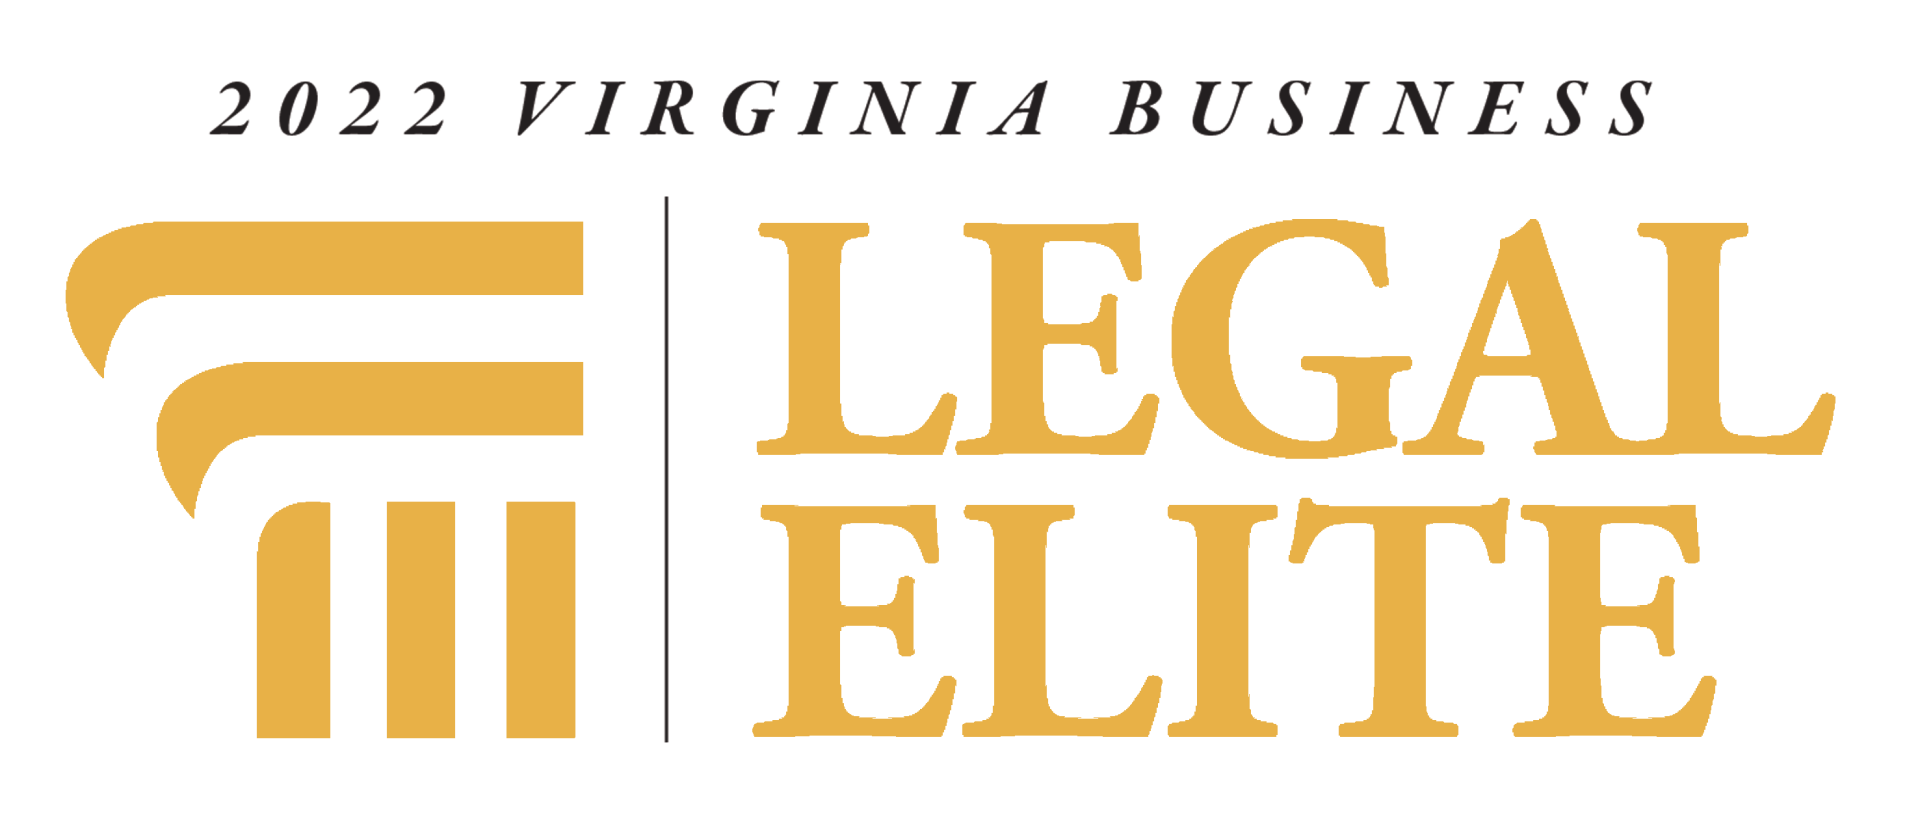 Virginia Lawyers Weekly Named Diane Toscano an Influential Women of Law